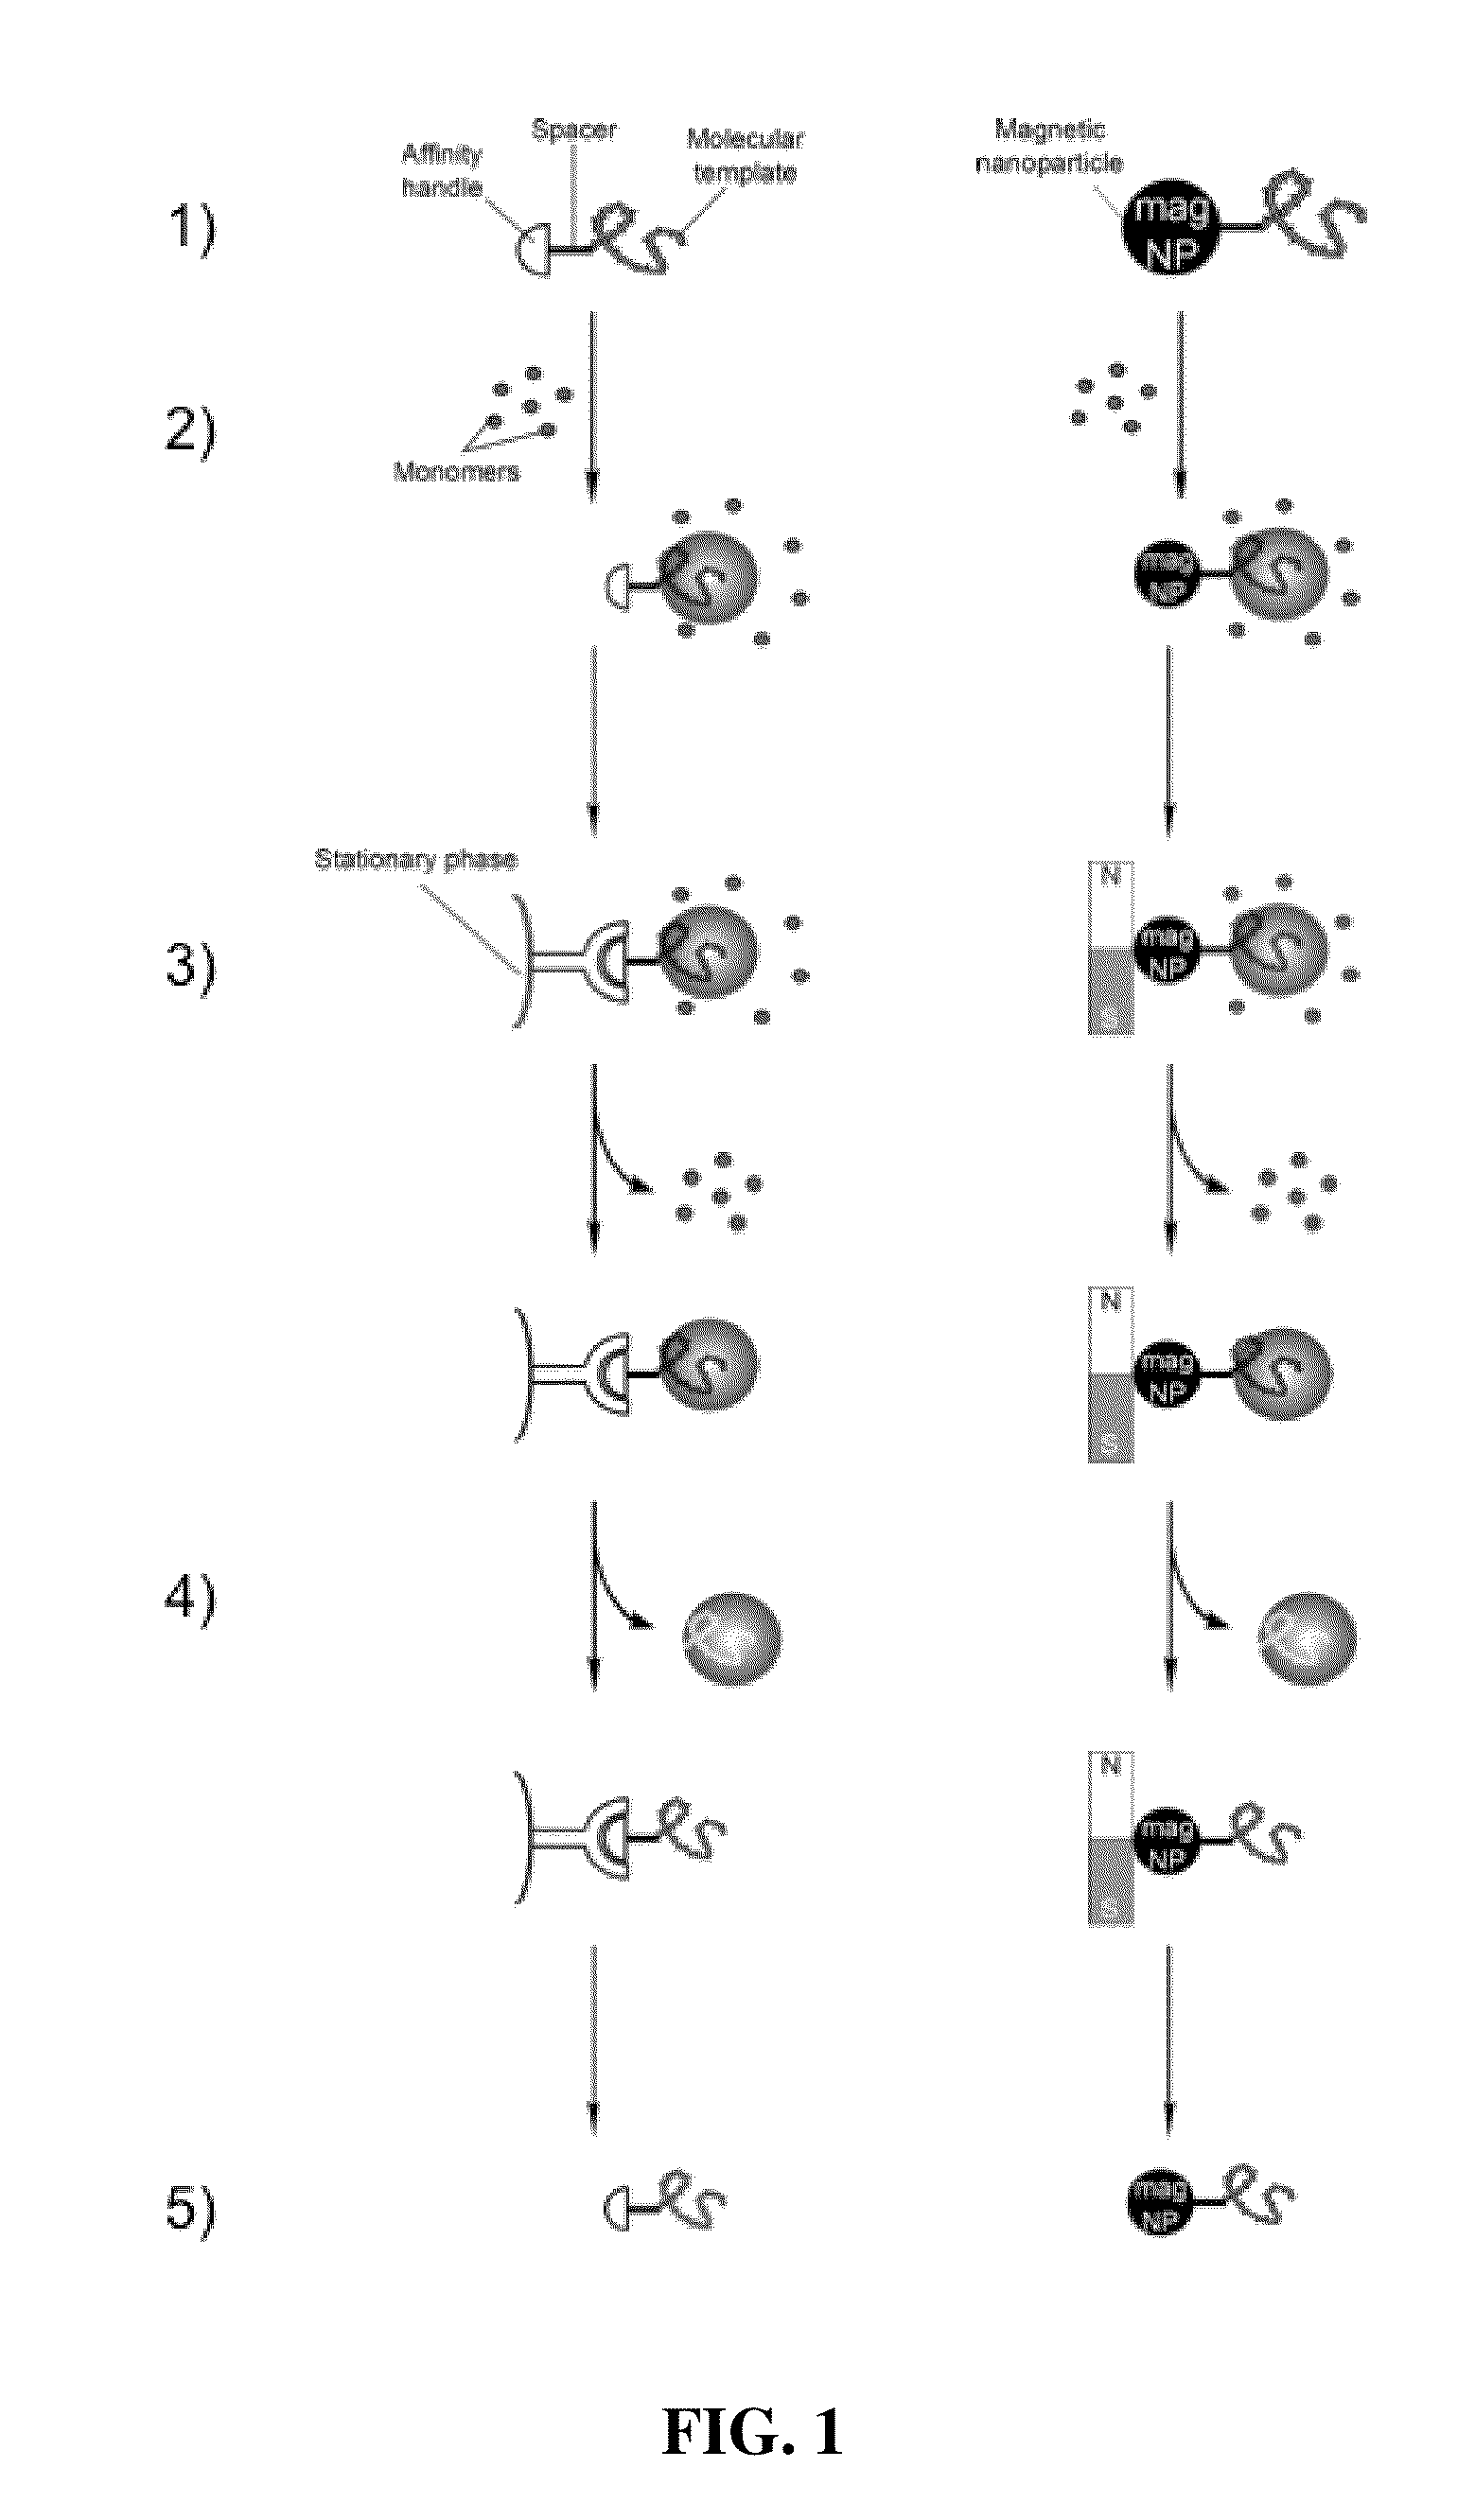 Polymers prepared using smart templates